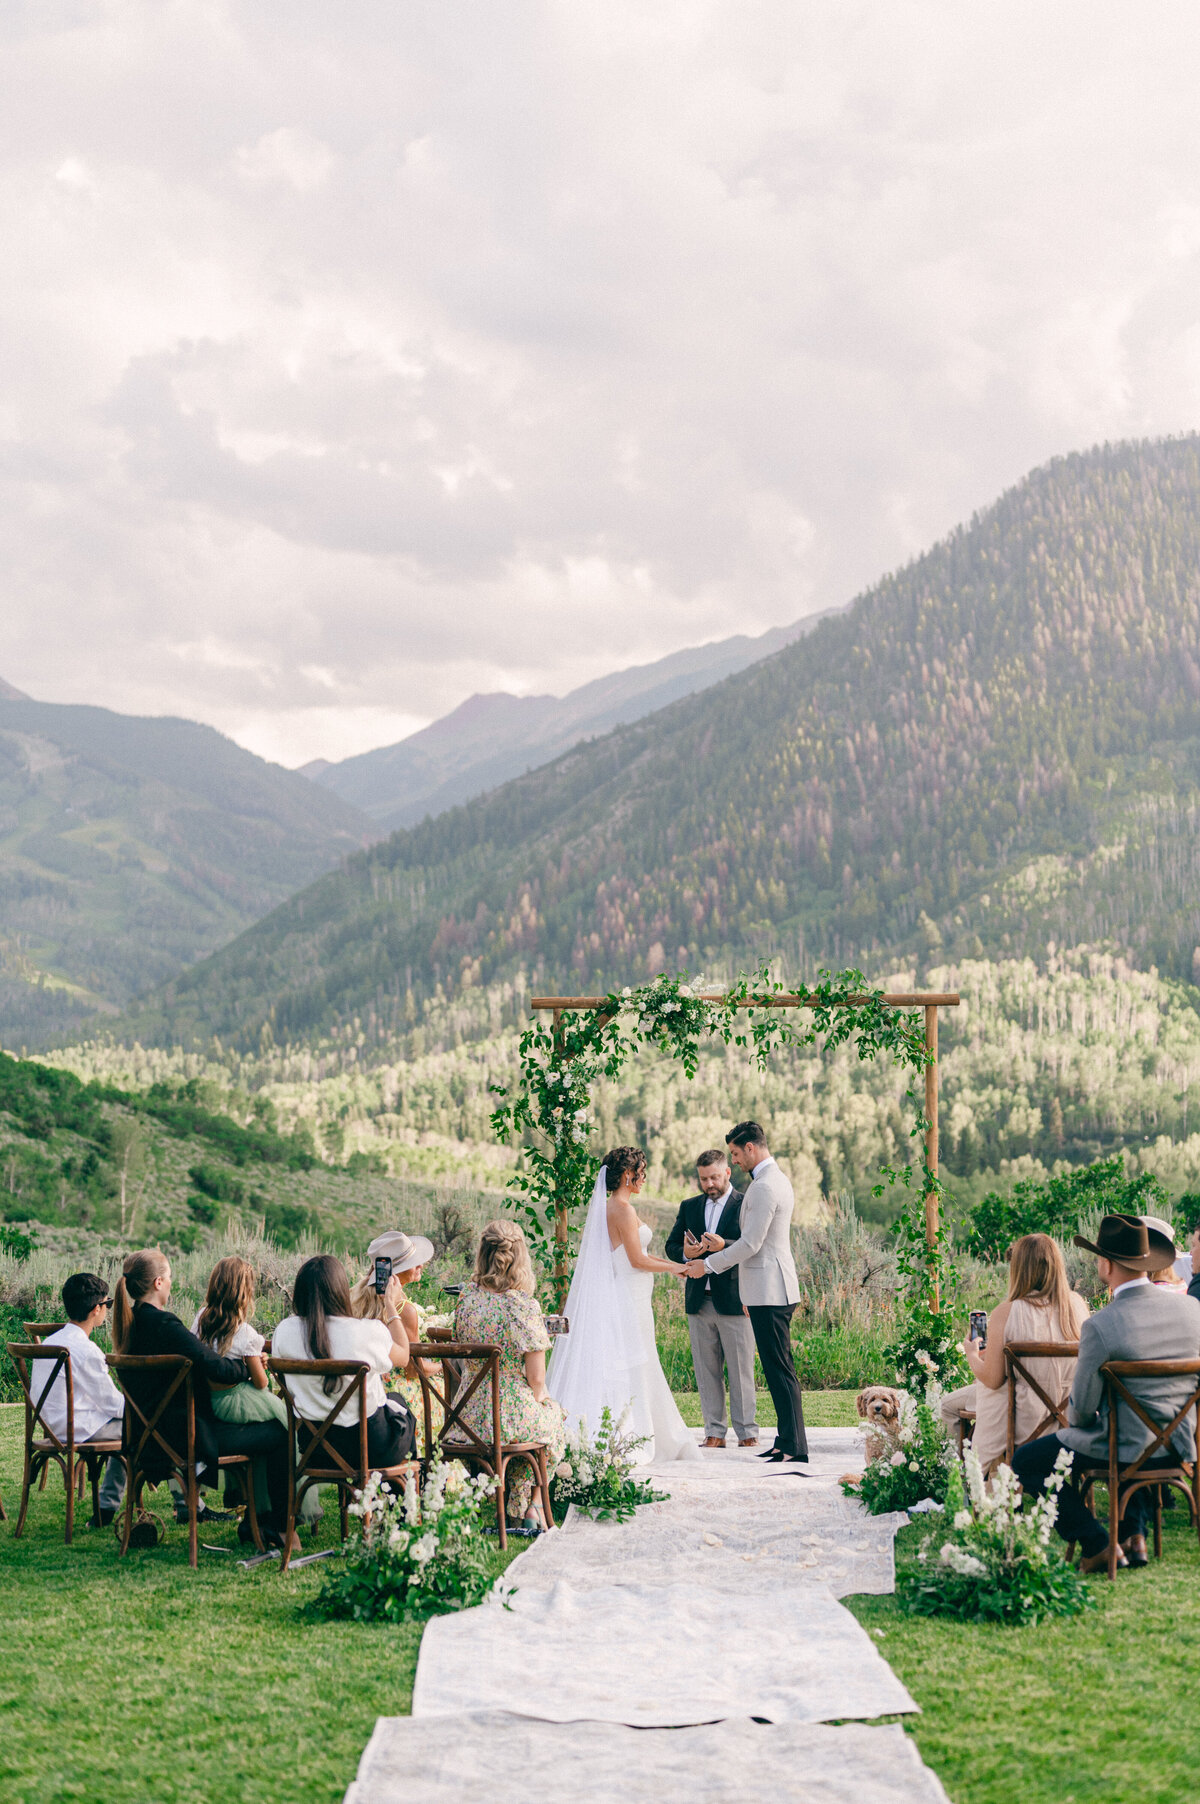 Lia-Ross-Aspen-Snowmass-Patak-Ranch-Wedding-Photography-By-Jacie-Marguerite-396